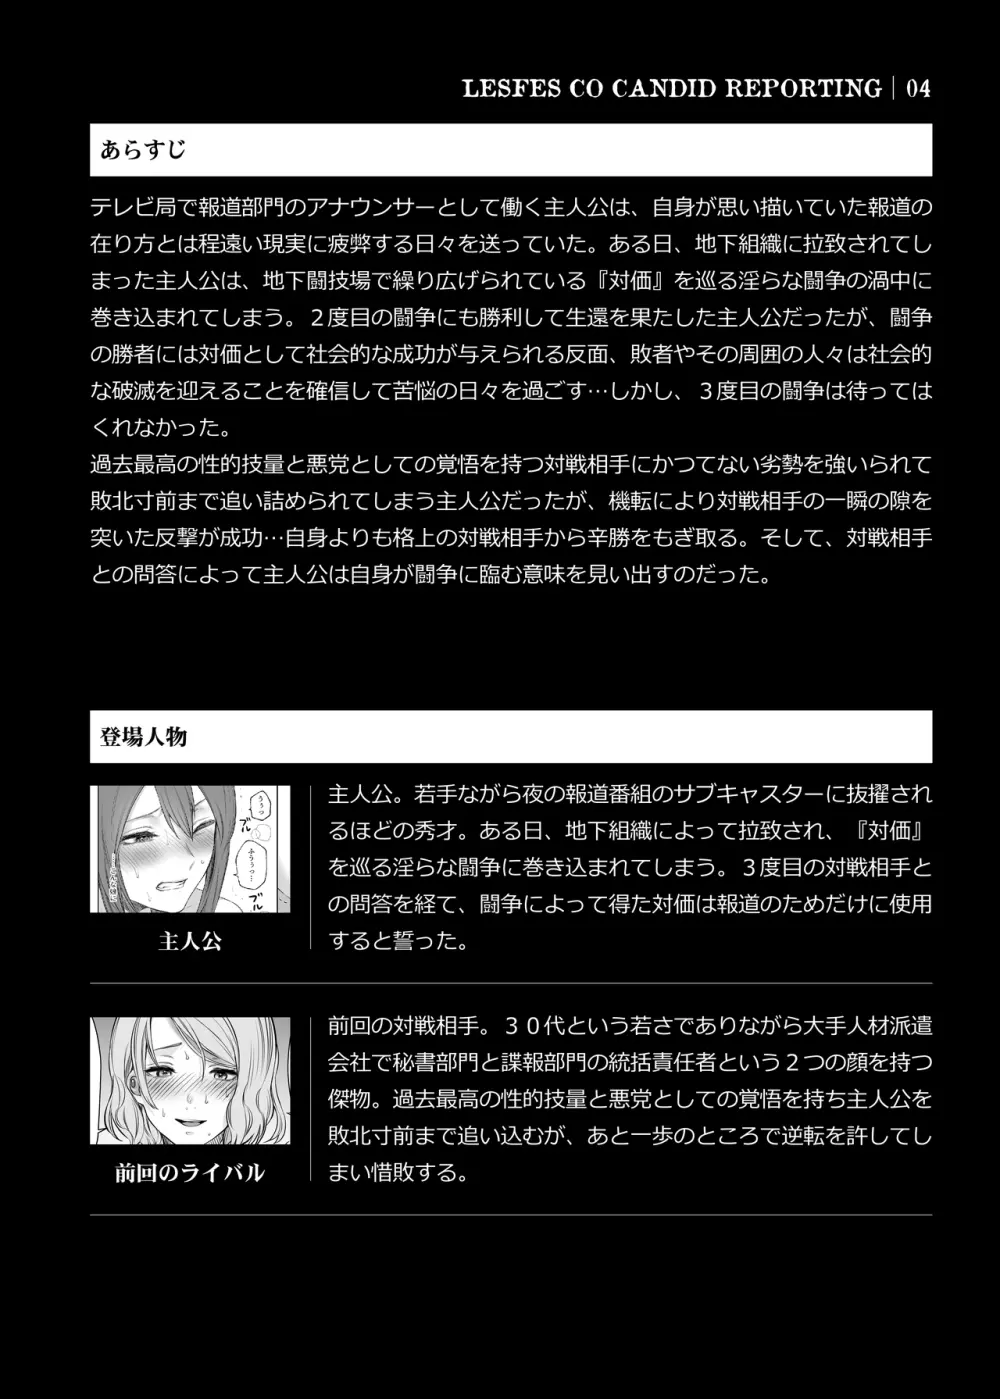 LESFES CO CANDID REPORTING VOL.004 - page3